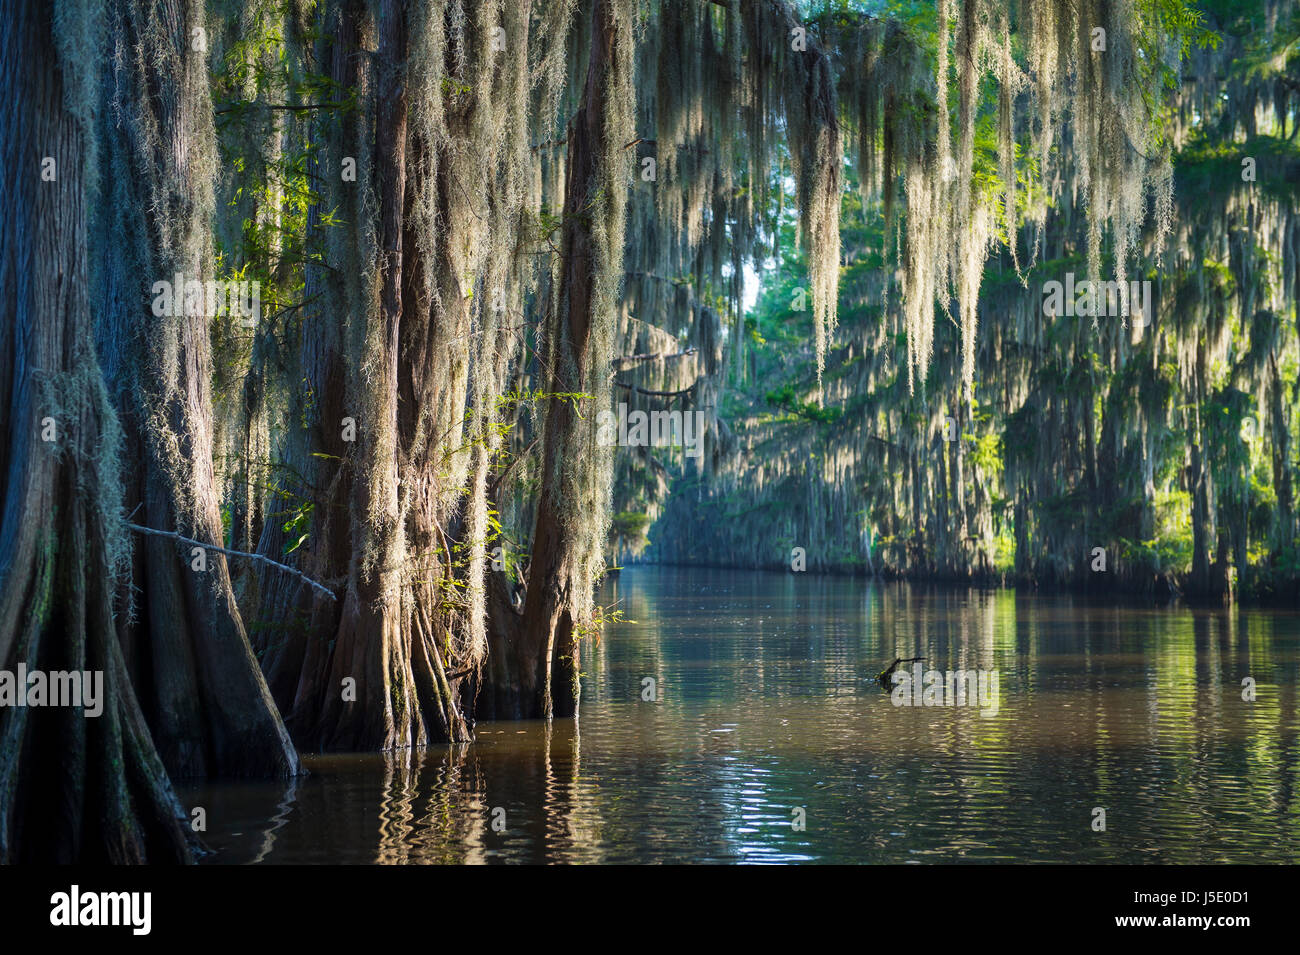 Misty morning swamp bayou scene of the American South featuring bald cypress trees and Spanish moss in Caddo Lake, Texas Stock Photo